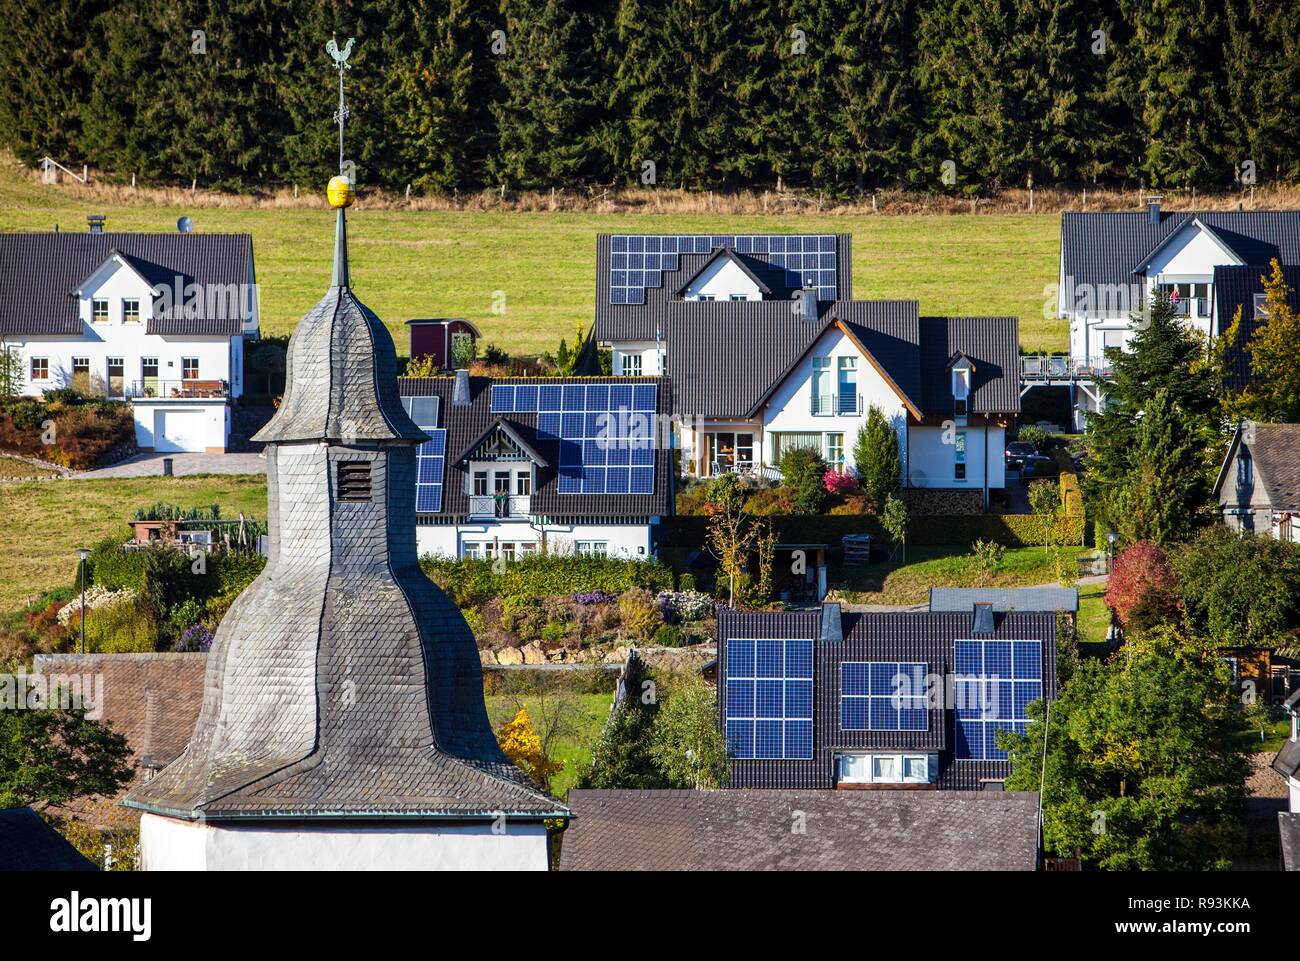 Solar panels on the roofs of residential houses, Oberkirchen, North Rhine-Westphalia Stock Photo